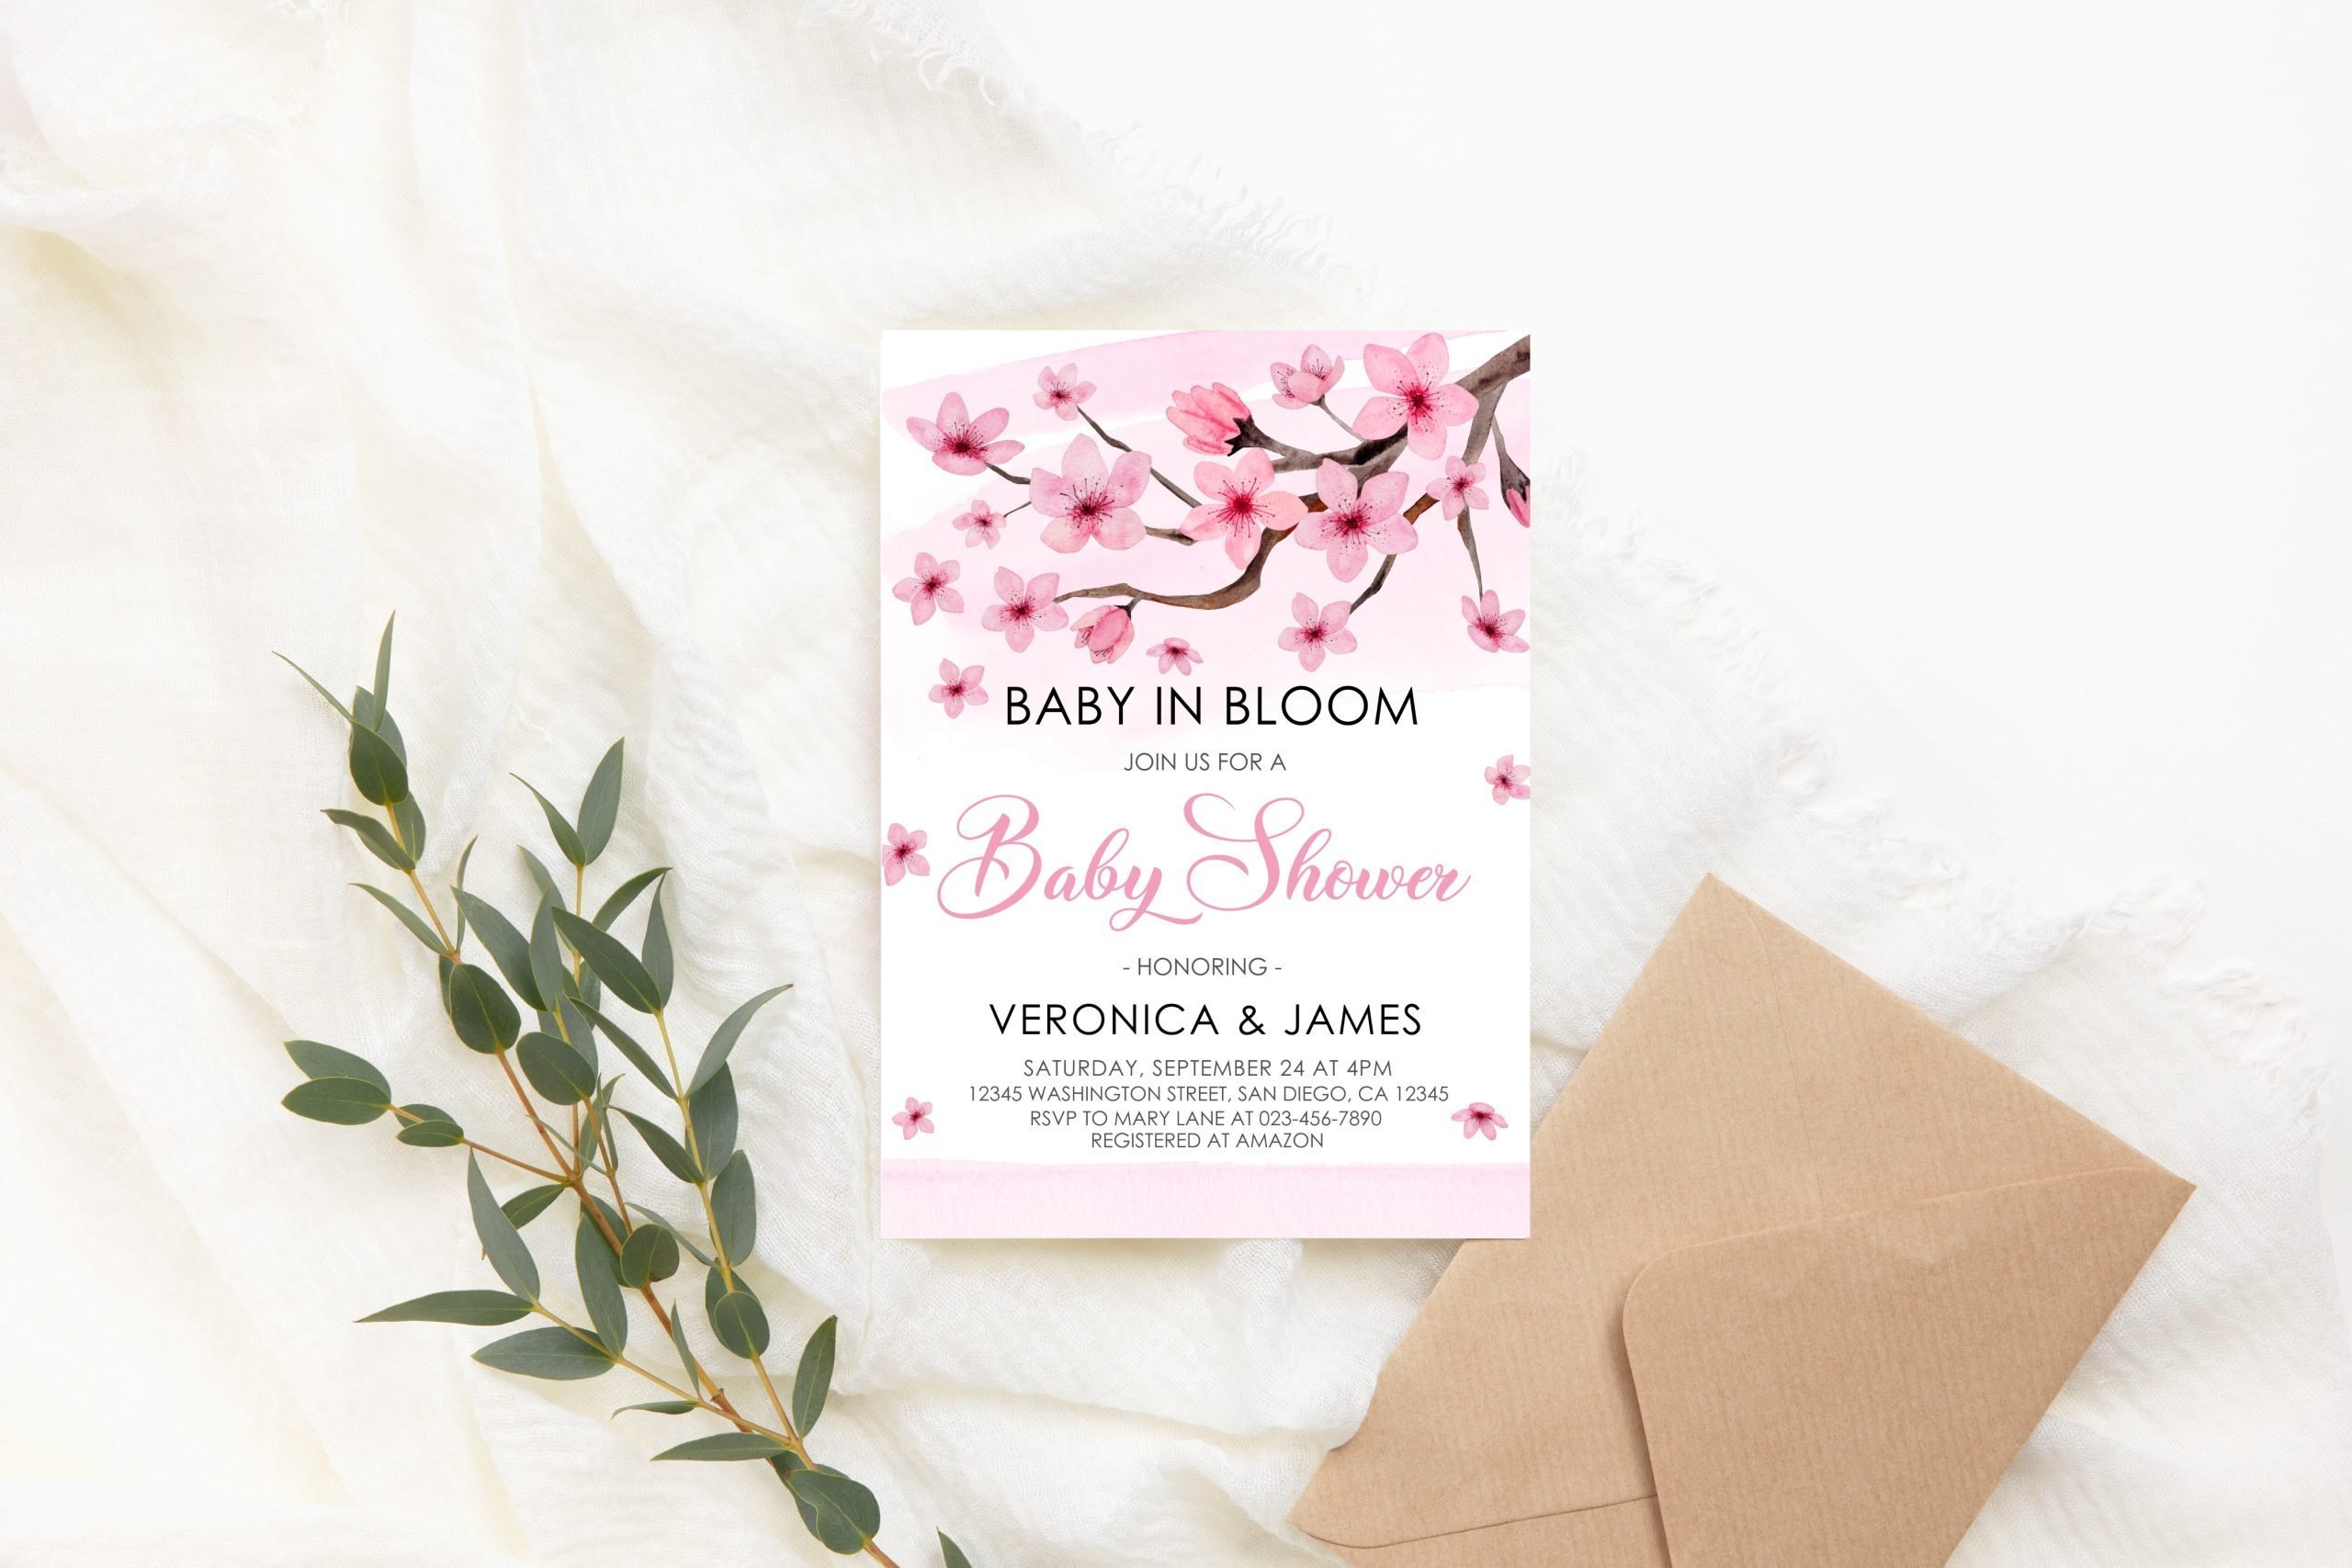 BABY SHOWER Editable Cherry Blossom Baby Shower Invitation Set – Pink Floral Diaper Raffle, Thank You Card, Books for Baby – Corjl Template Baby Shower Printables.